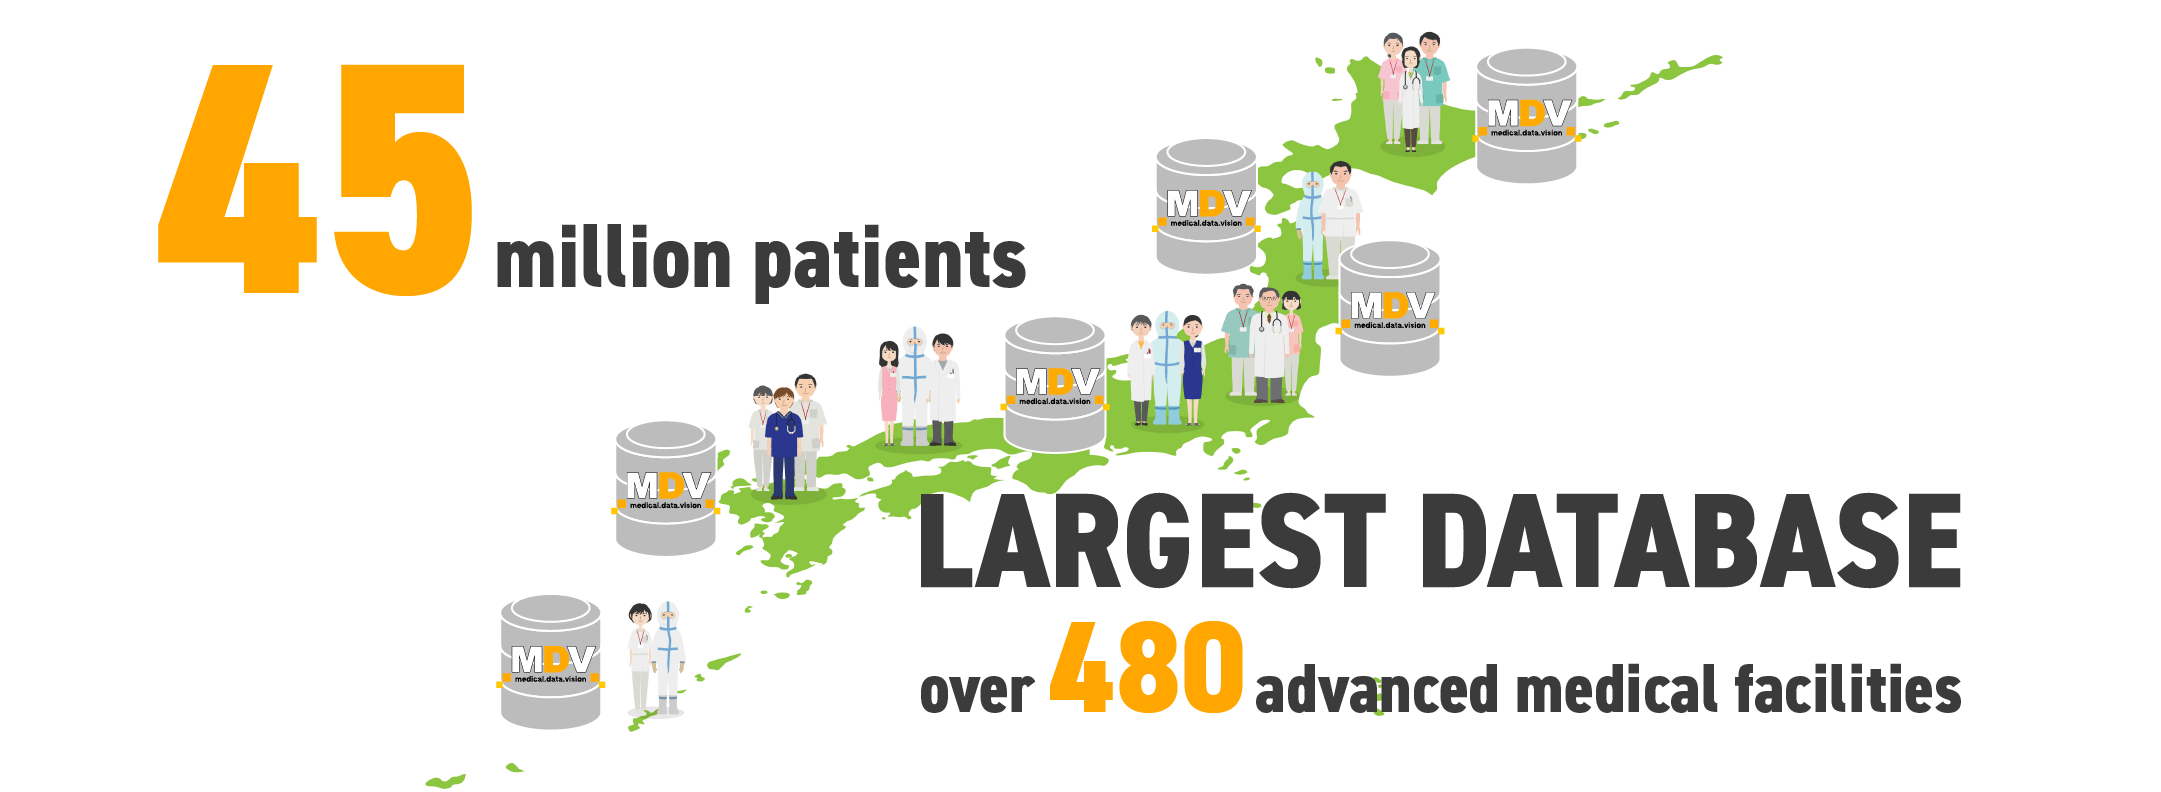 44 million patients LARGEST DATABASE of 480 advanced medical facilities